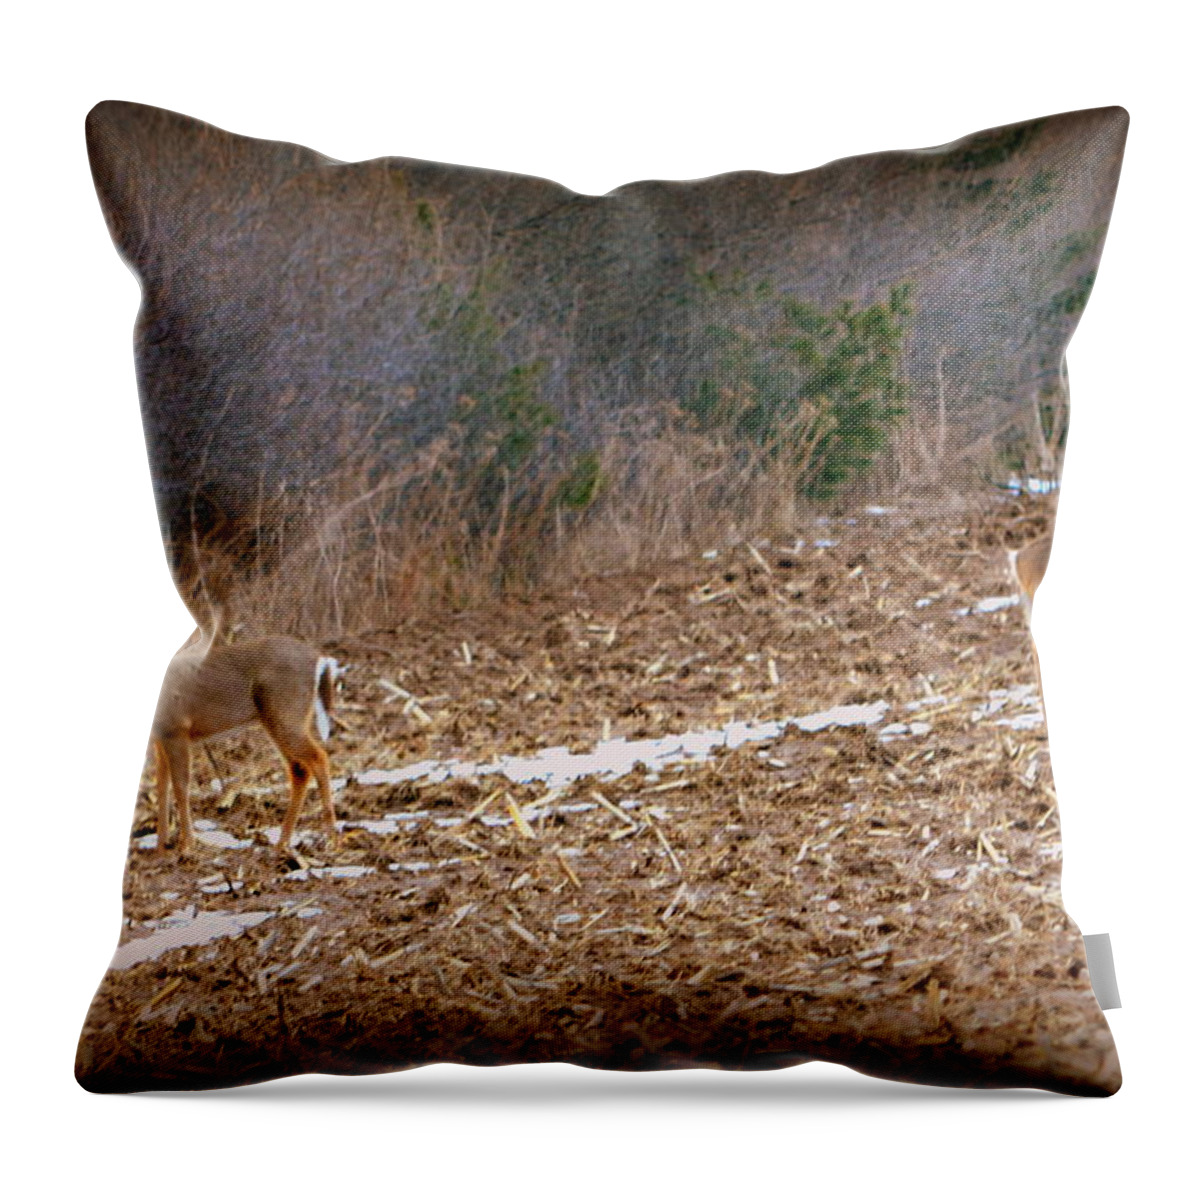 Winter Throw Pillow featuring the photograph Long Winter by Kimberly Woyak